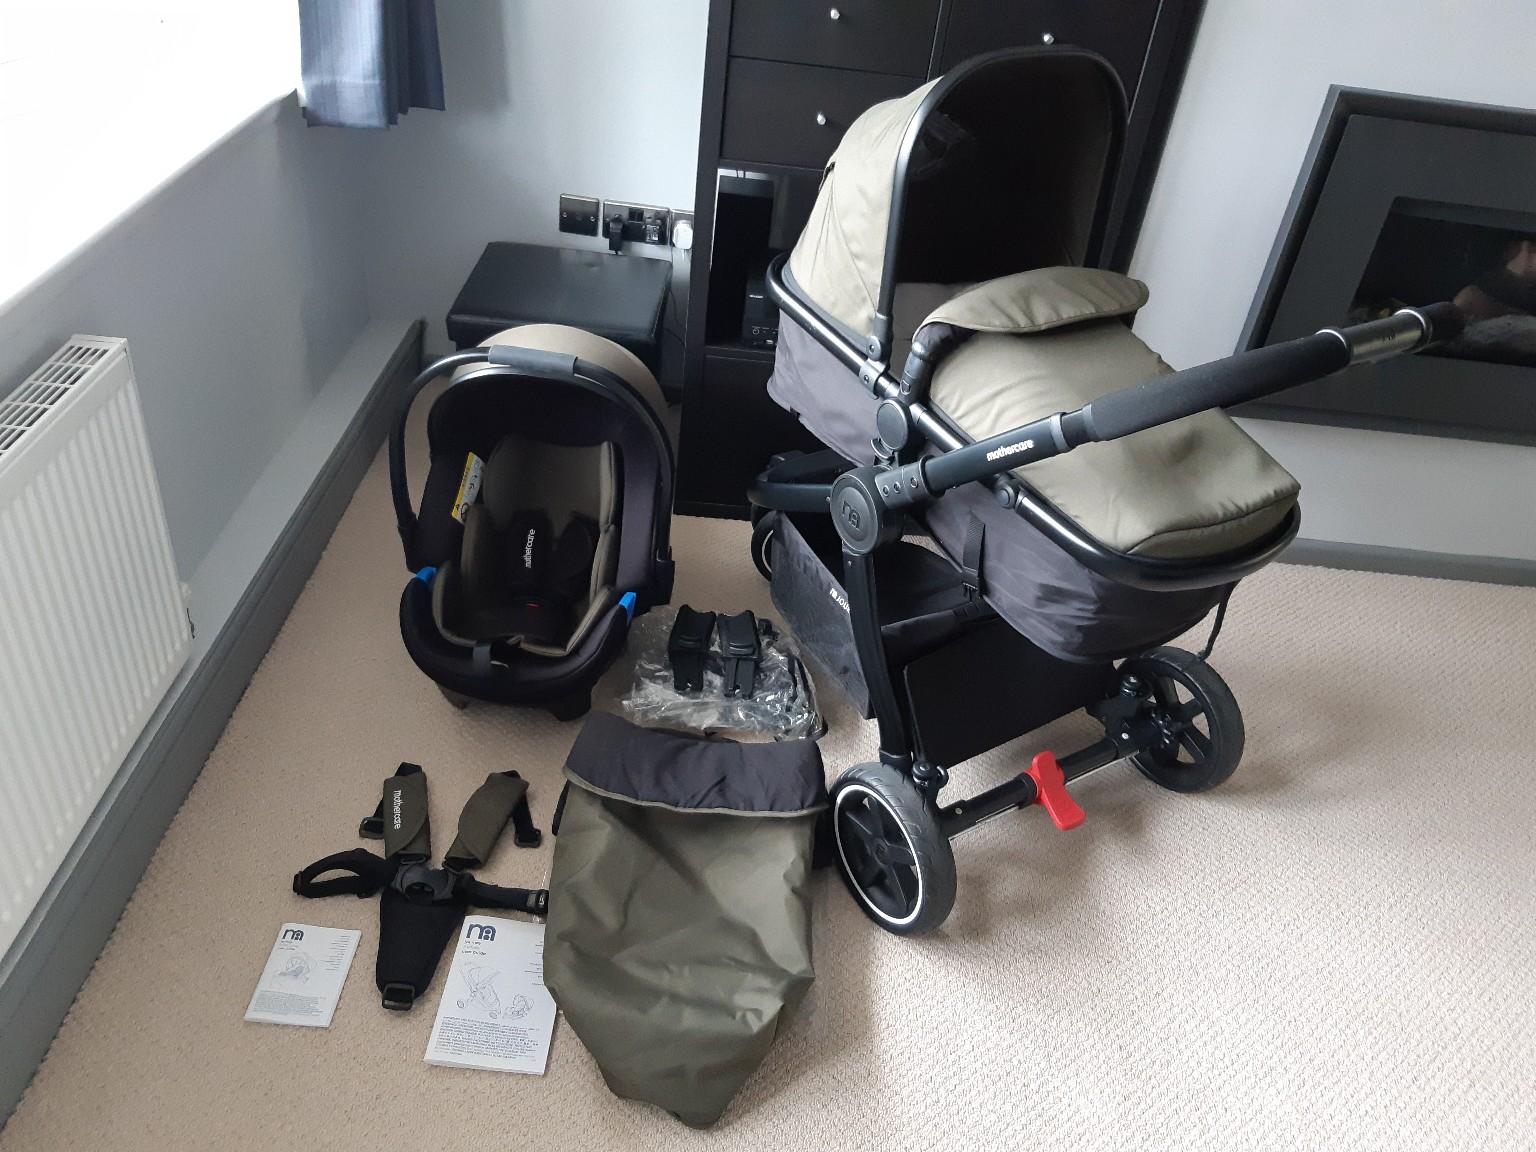 mothercare journey 3 wheel travel system